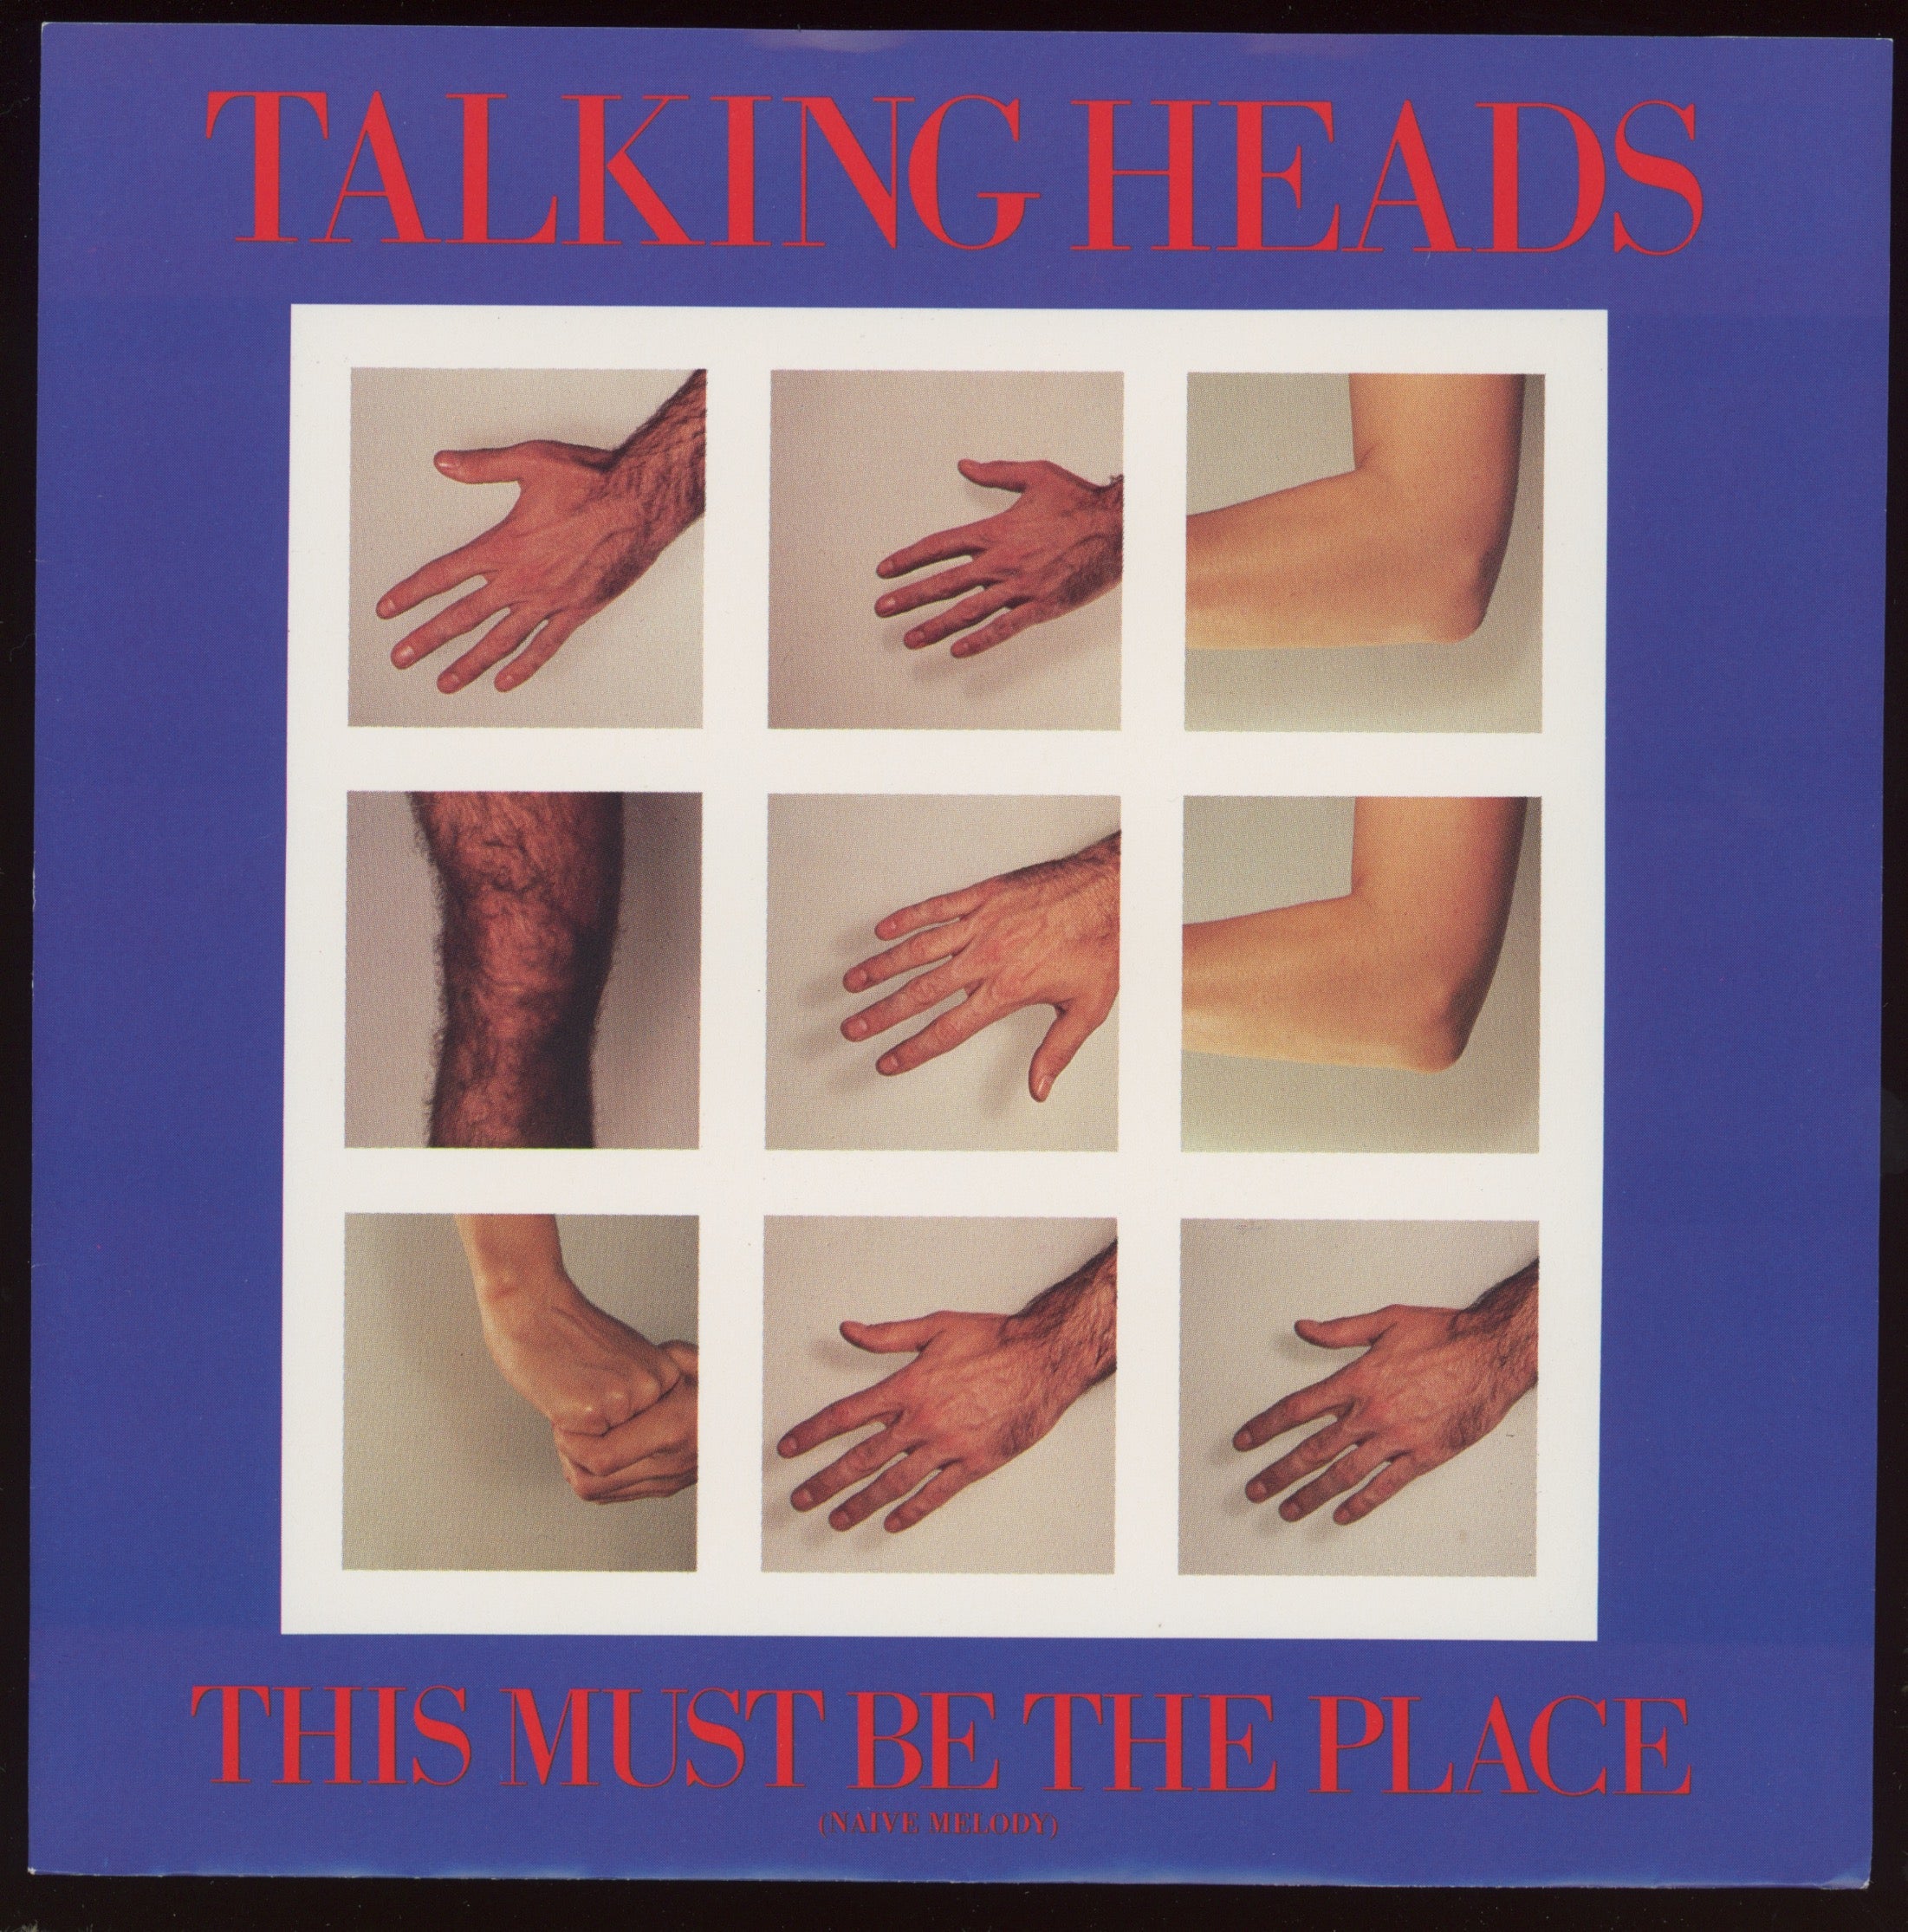 Talking Heads - This Must Be The Place (Naive Melody) on Sire With Picture Sleeve